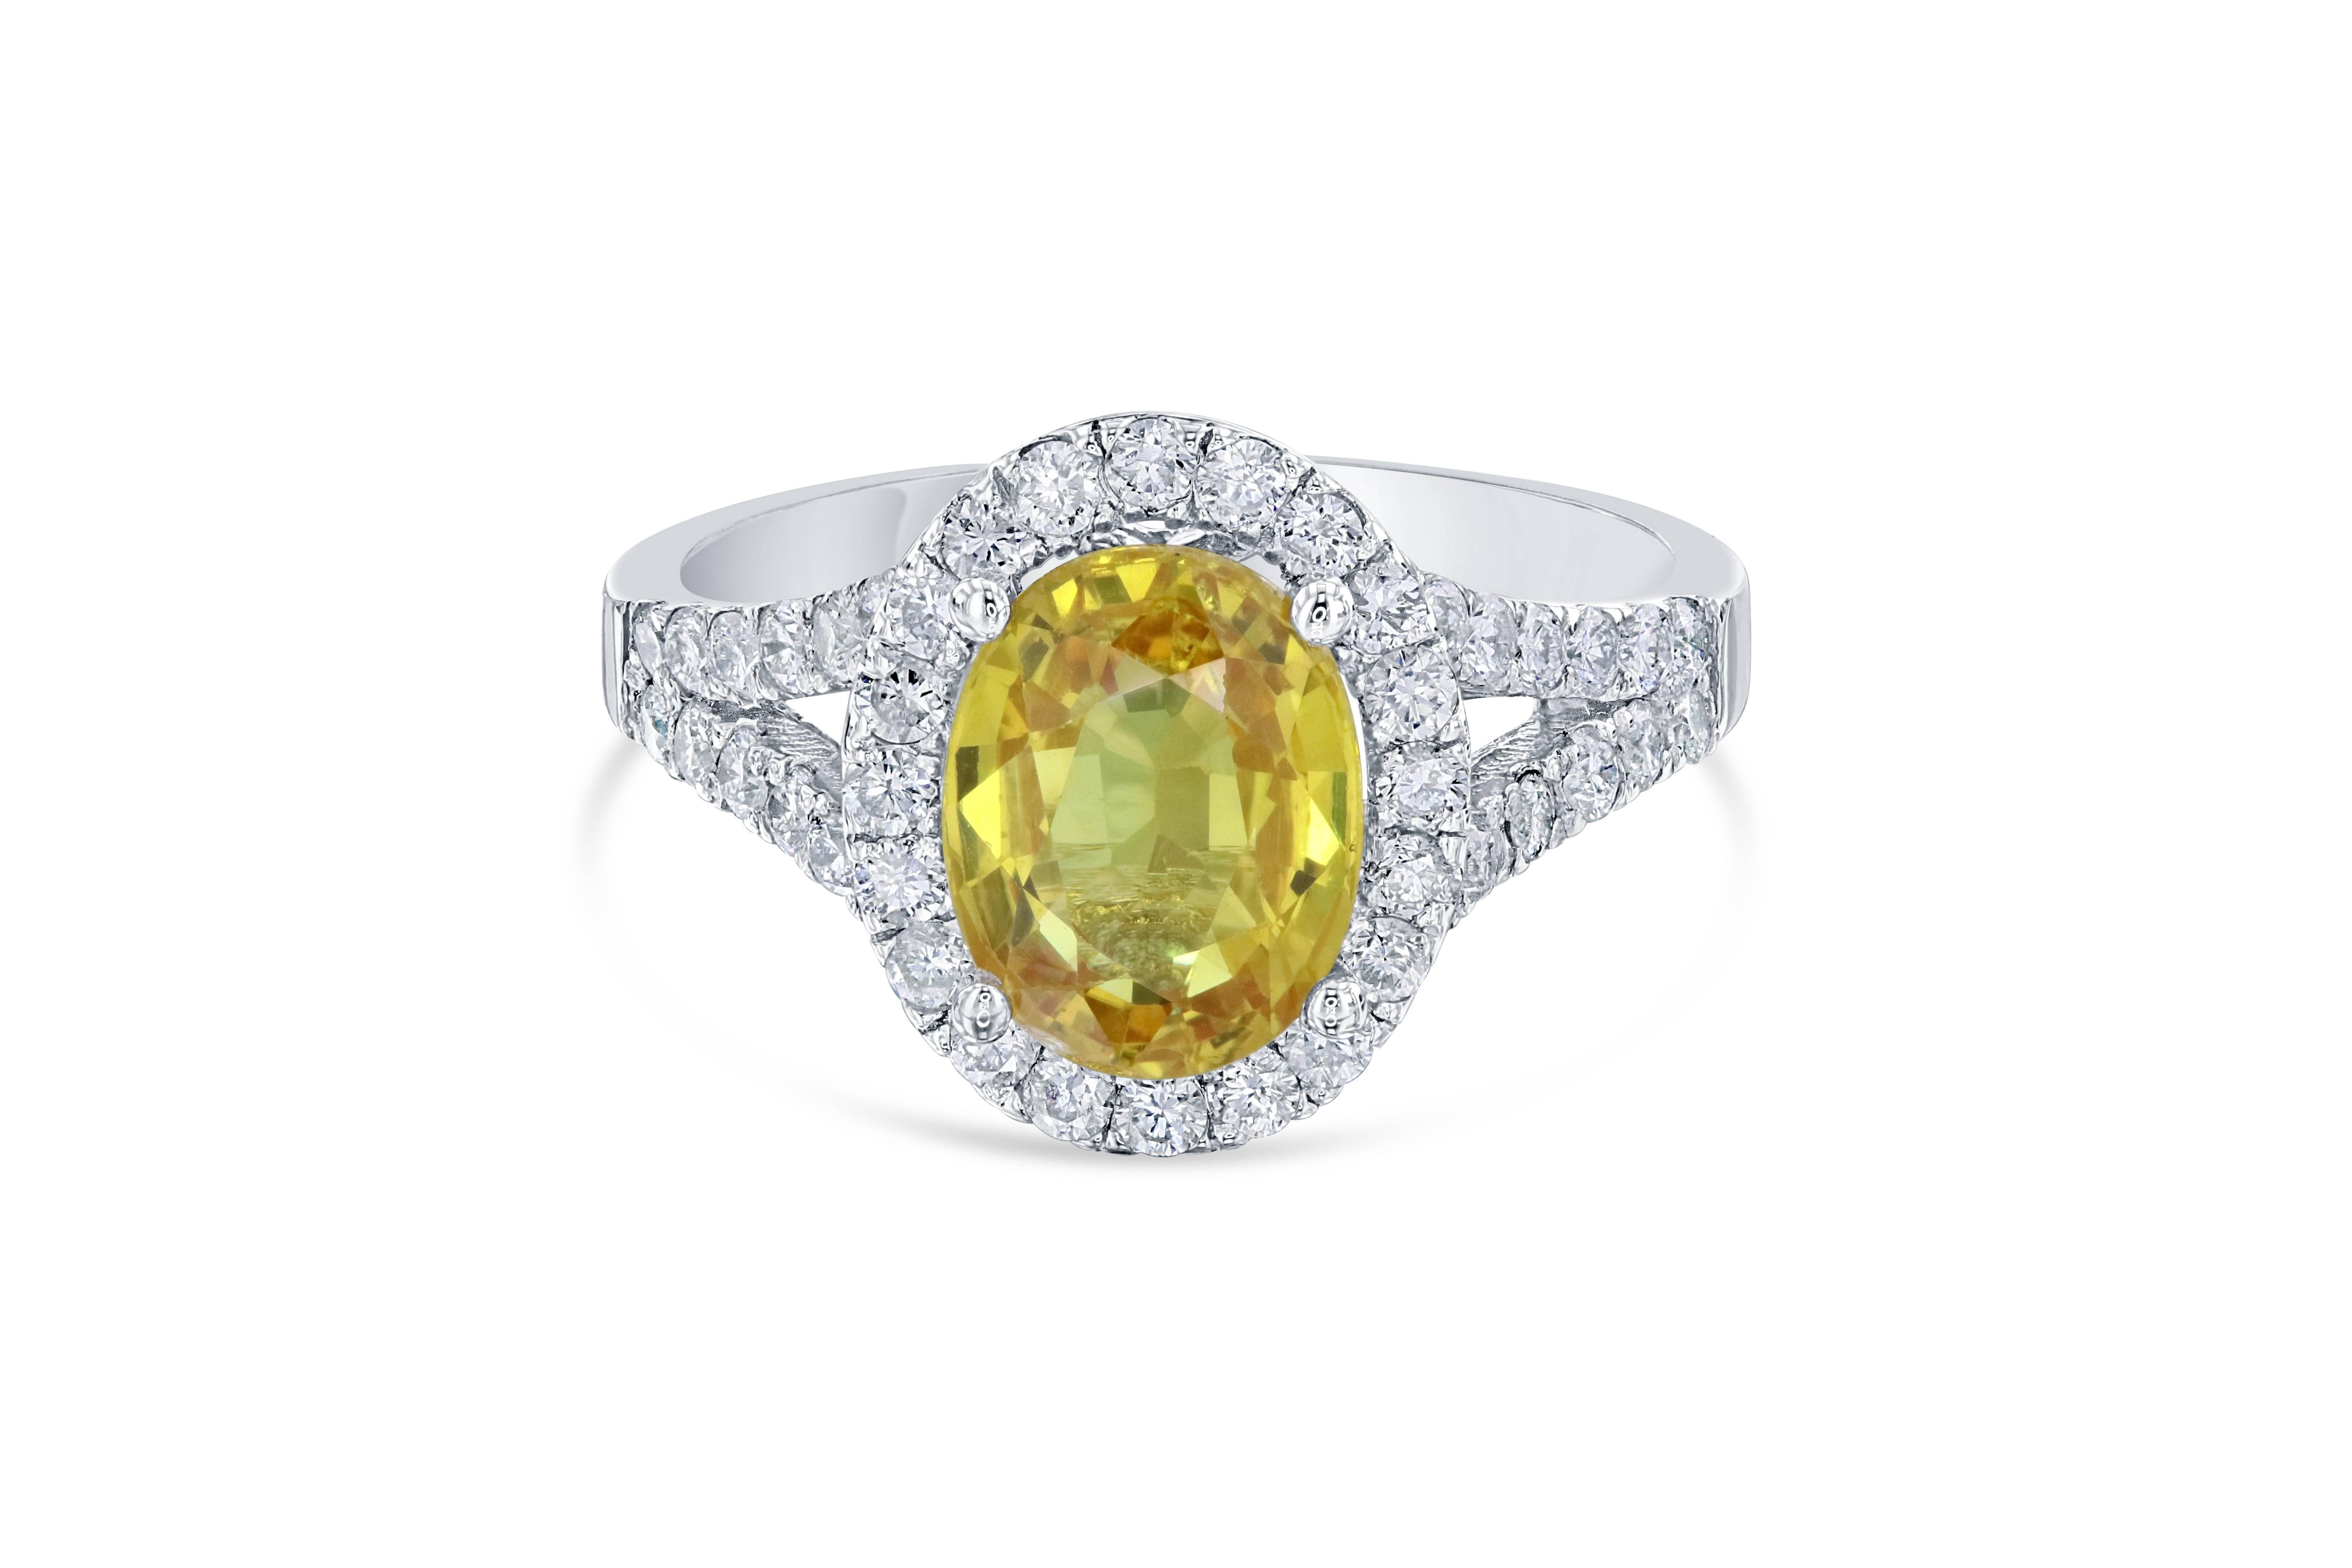 A unique Yellow Sapphire Diamond Ring that can be a beautiful Engagement Ring. The Oval Cut Yellow Sapphire is 2.77 Carats. It has a halo of 44 Round Cut Diamonds that weigh 0.72 Carats. The total carat weight of the ring is 3.49 Carats. 
It is set